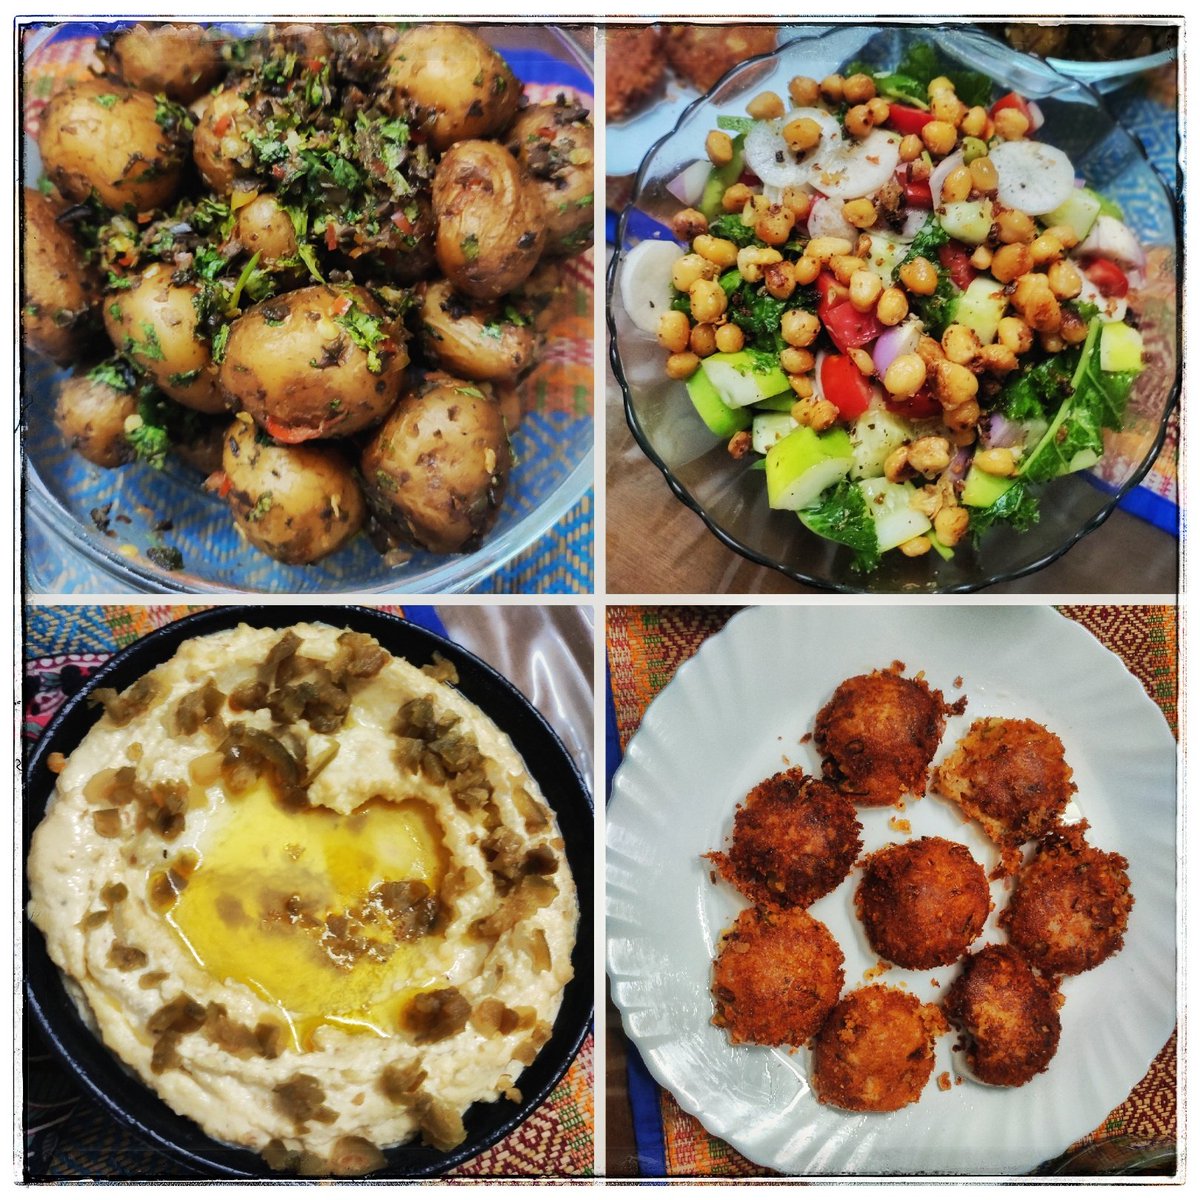 No point of counting days of  #JogaInLockdown now. I'll just be adding to this thread with anything remotely nice created at my end. Did some firsts and satiated my foodie cravings during this break. Midweek was a Mediterranean spread, all made from scratch   #jogacooks